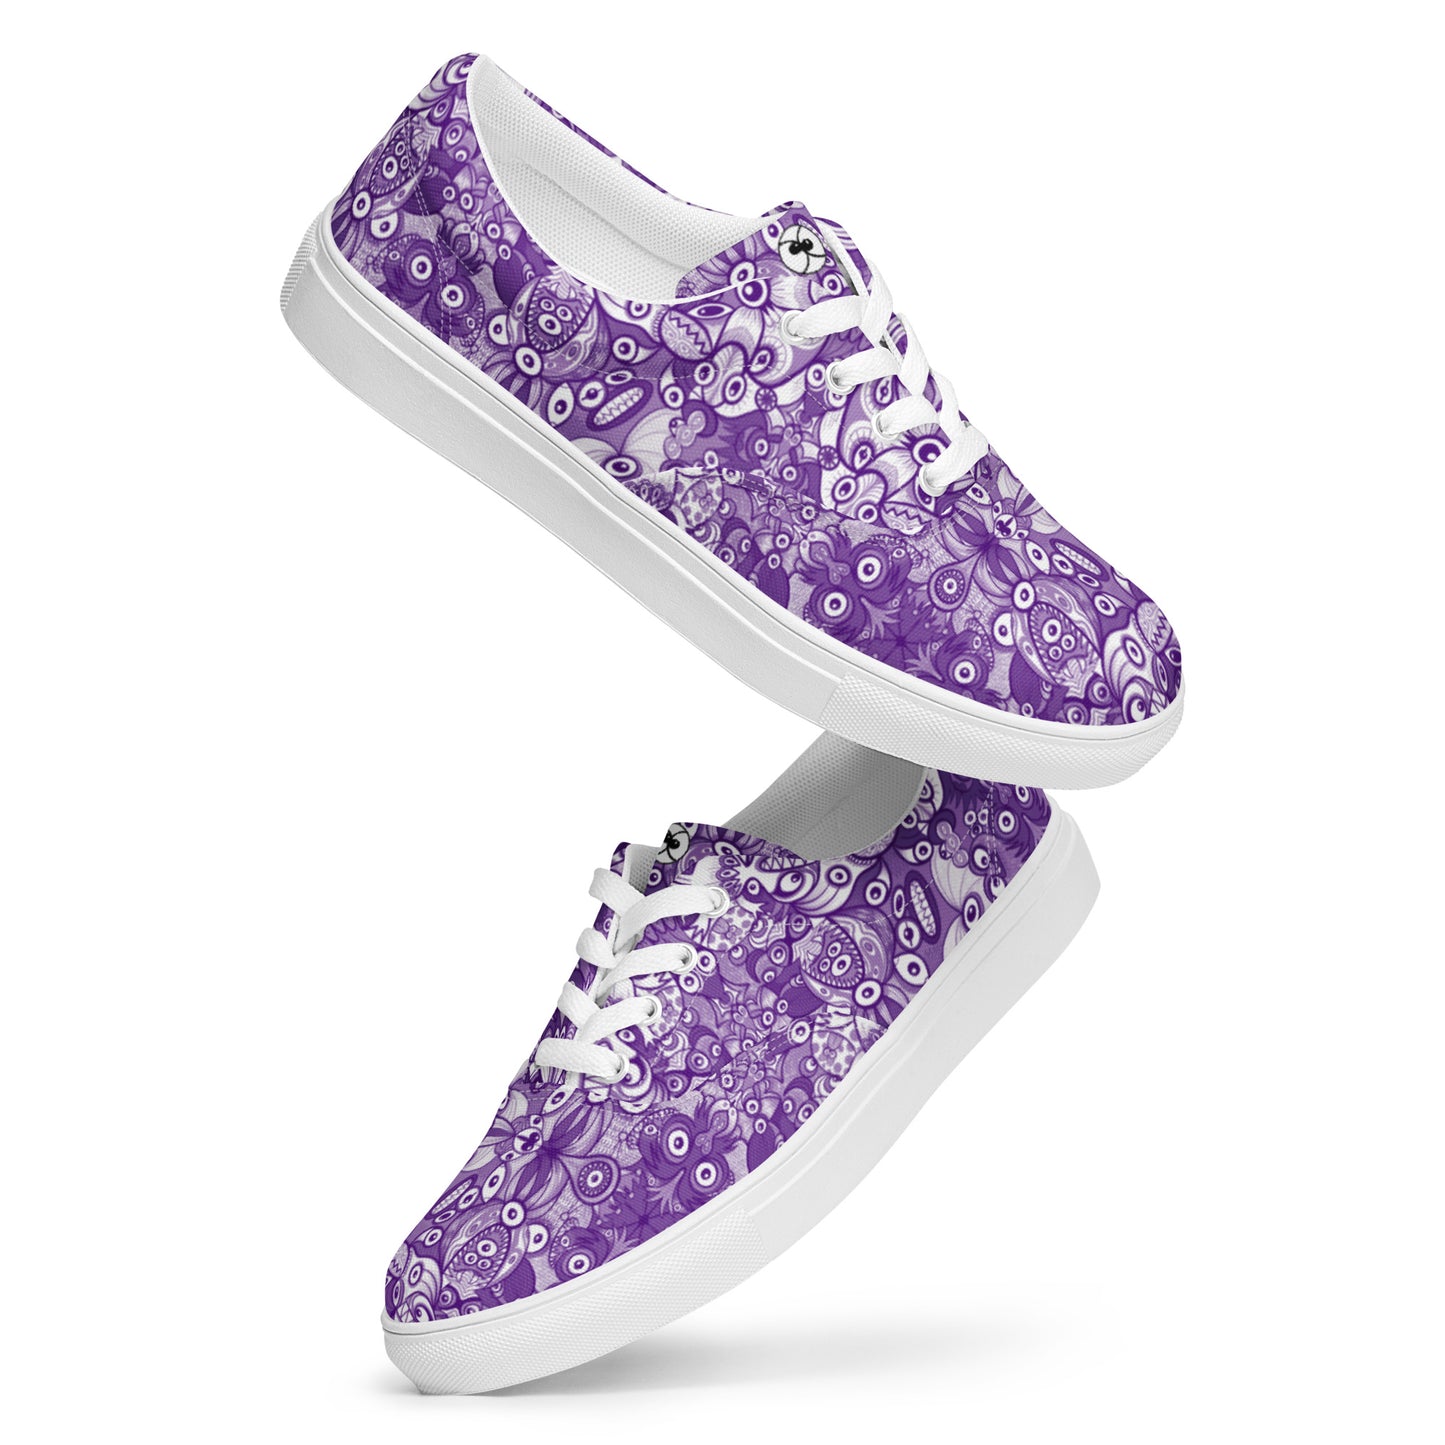 Fabulous blue critters doodle art Men’s lace-up canvas shoes. Playing with shoes